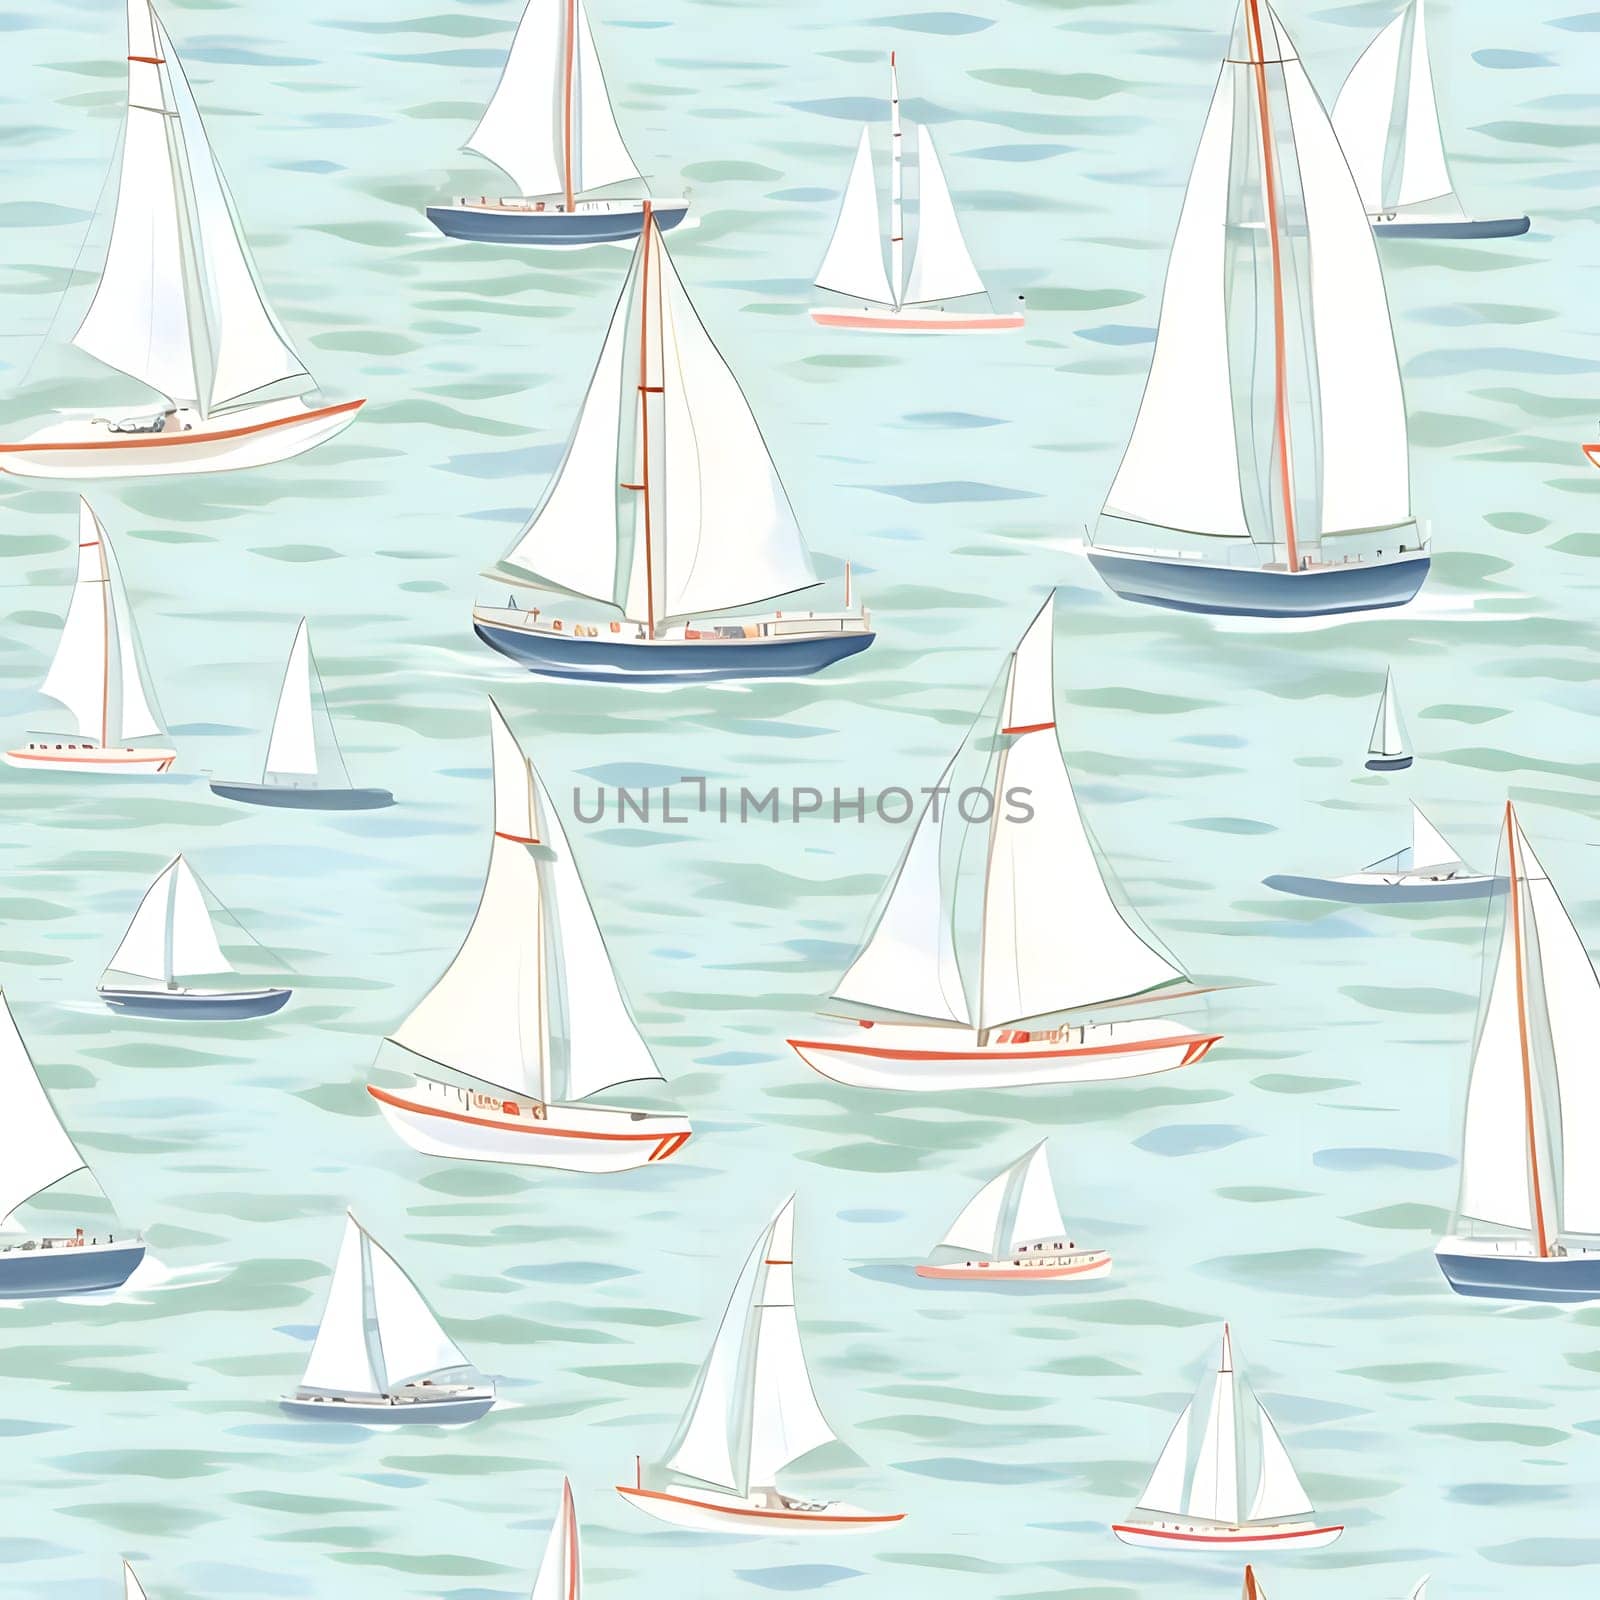 Patterns and banners backgrounds: Seamless pattern with sailboats on the water. Vector illustration.